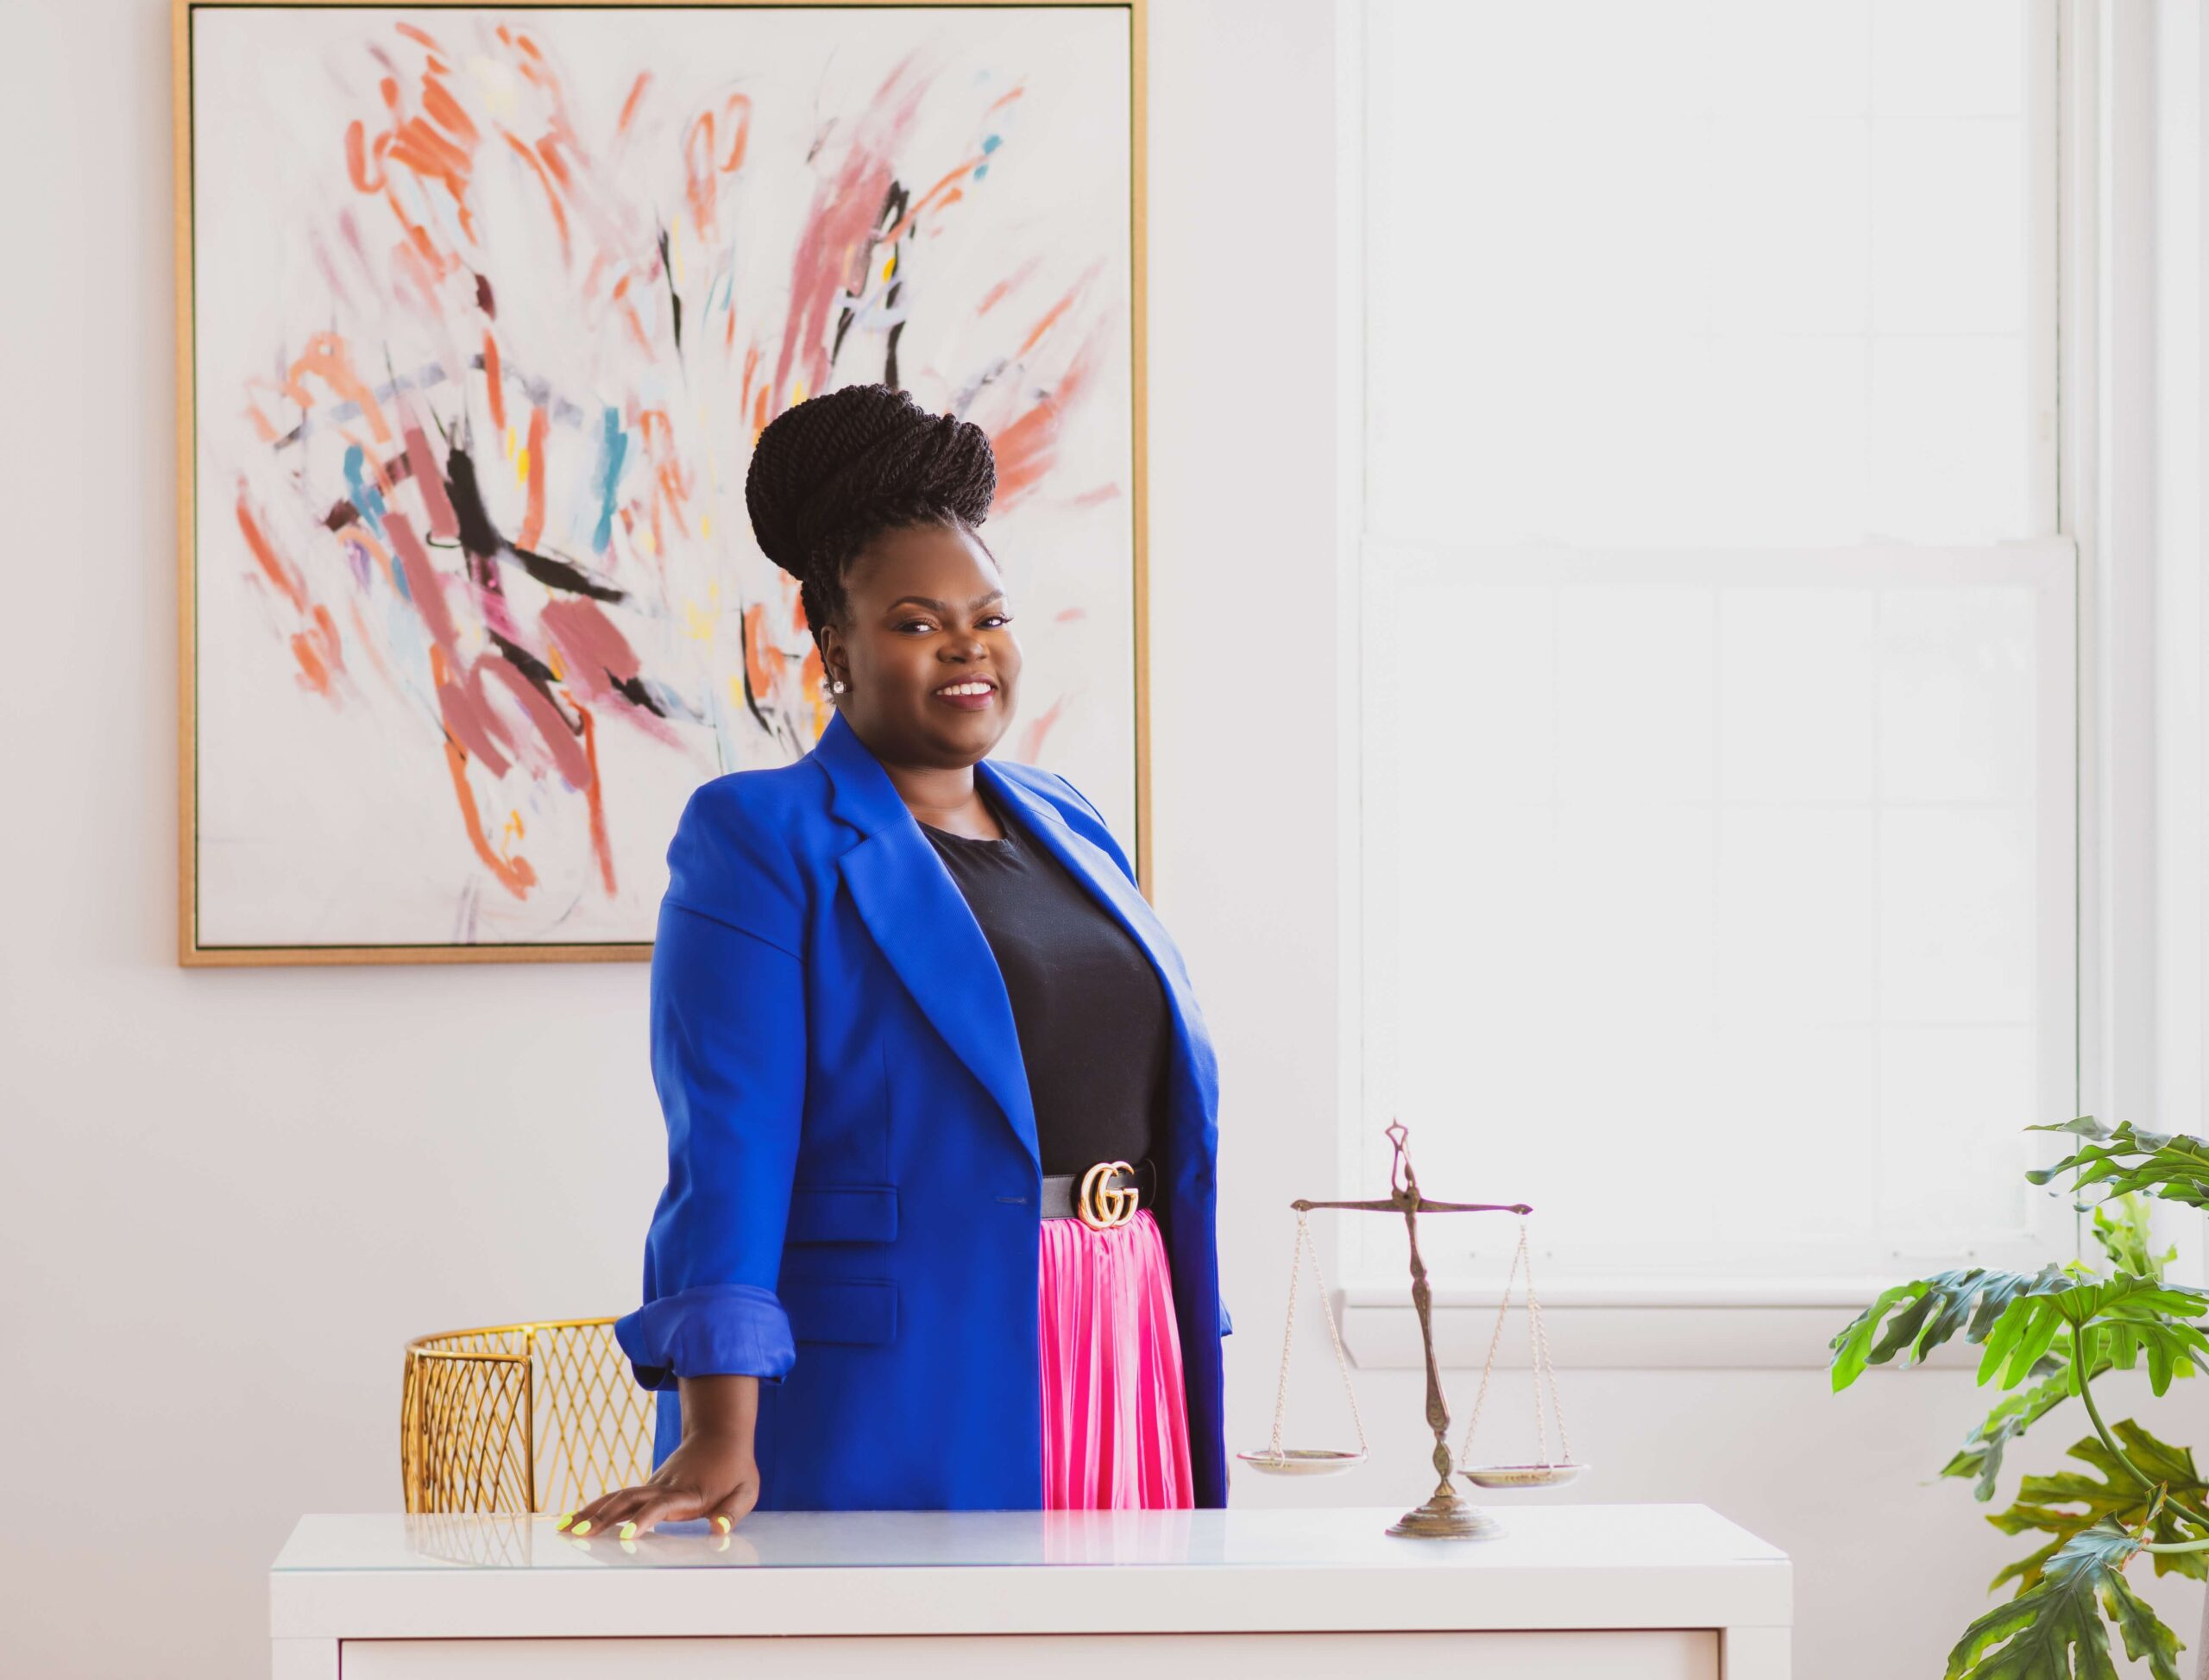 A Black woman wearing a cobalt blue blazer, black shirt and hot-pink skirt standing behind a white desk with the scales of justice and a modern abstract painting behind her smiling at the camera